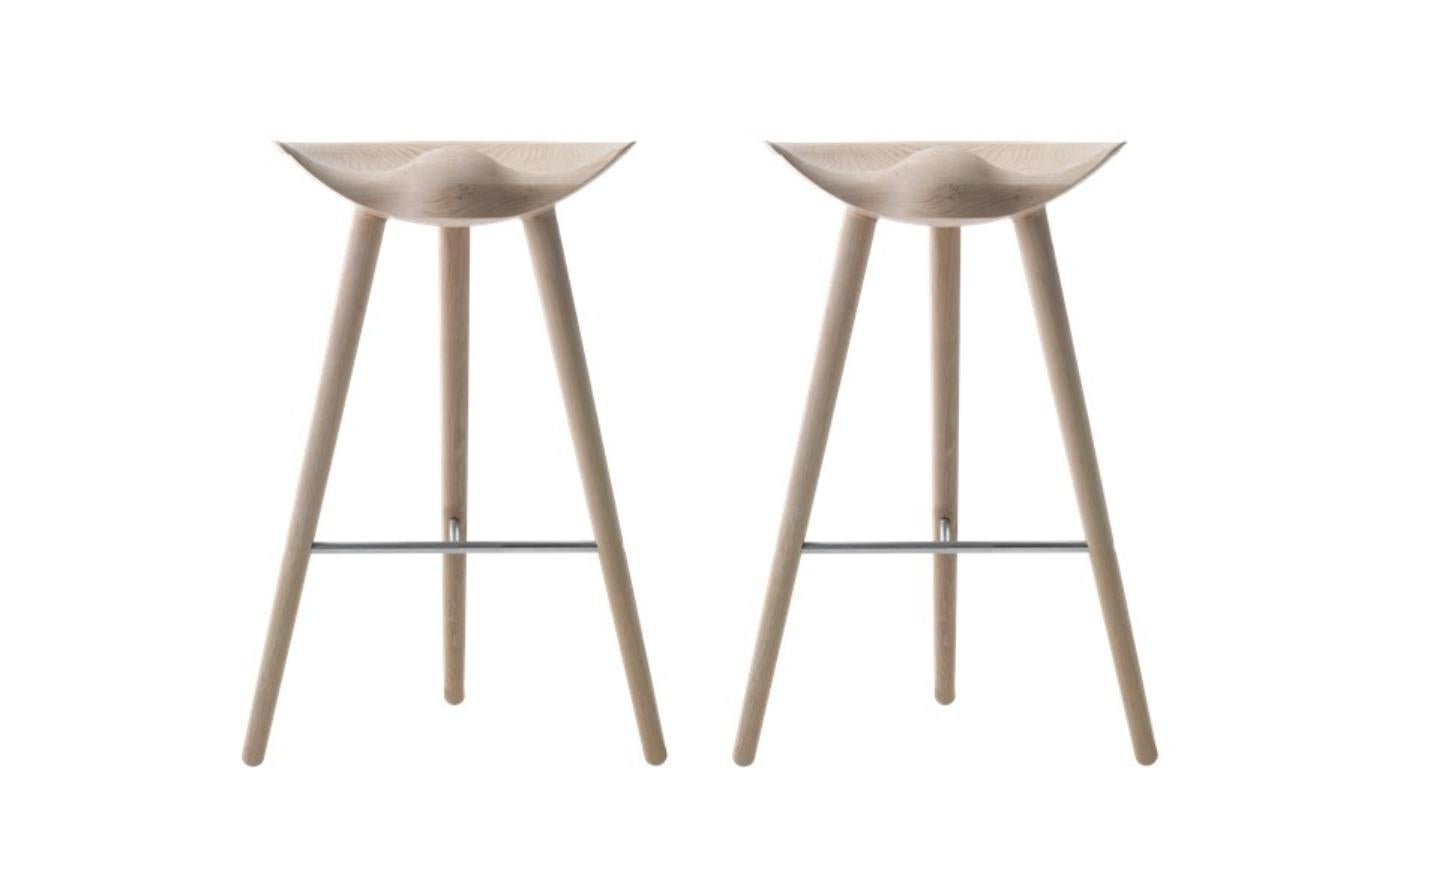 Set Of 2 Oak and Stainless Steel Bar Stools by Lassen
Dimensions: H 77 x W 36 x L 55.5 cm
Materials: Oak, Stainless Steel

In 1942 Mogens Lassen designed the Stool ML42 as a piece for a furniture exhibition held at the Danish Museum of